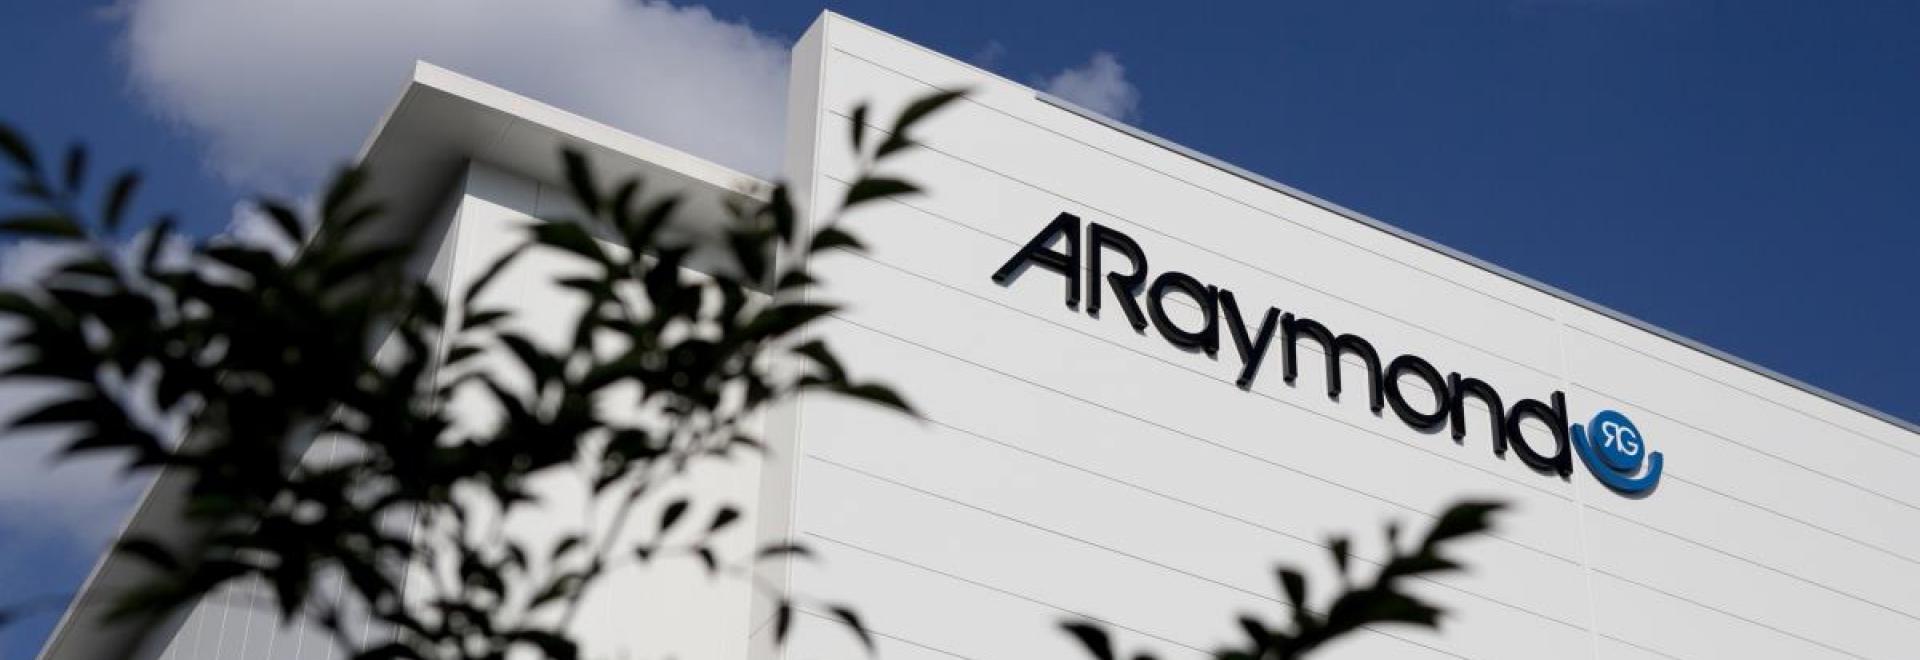 ARaymond & ACC team up for more performant, more sustainable, EV battery cells—made in Europe.